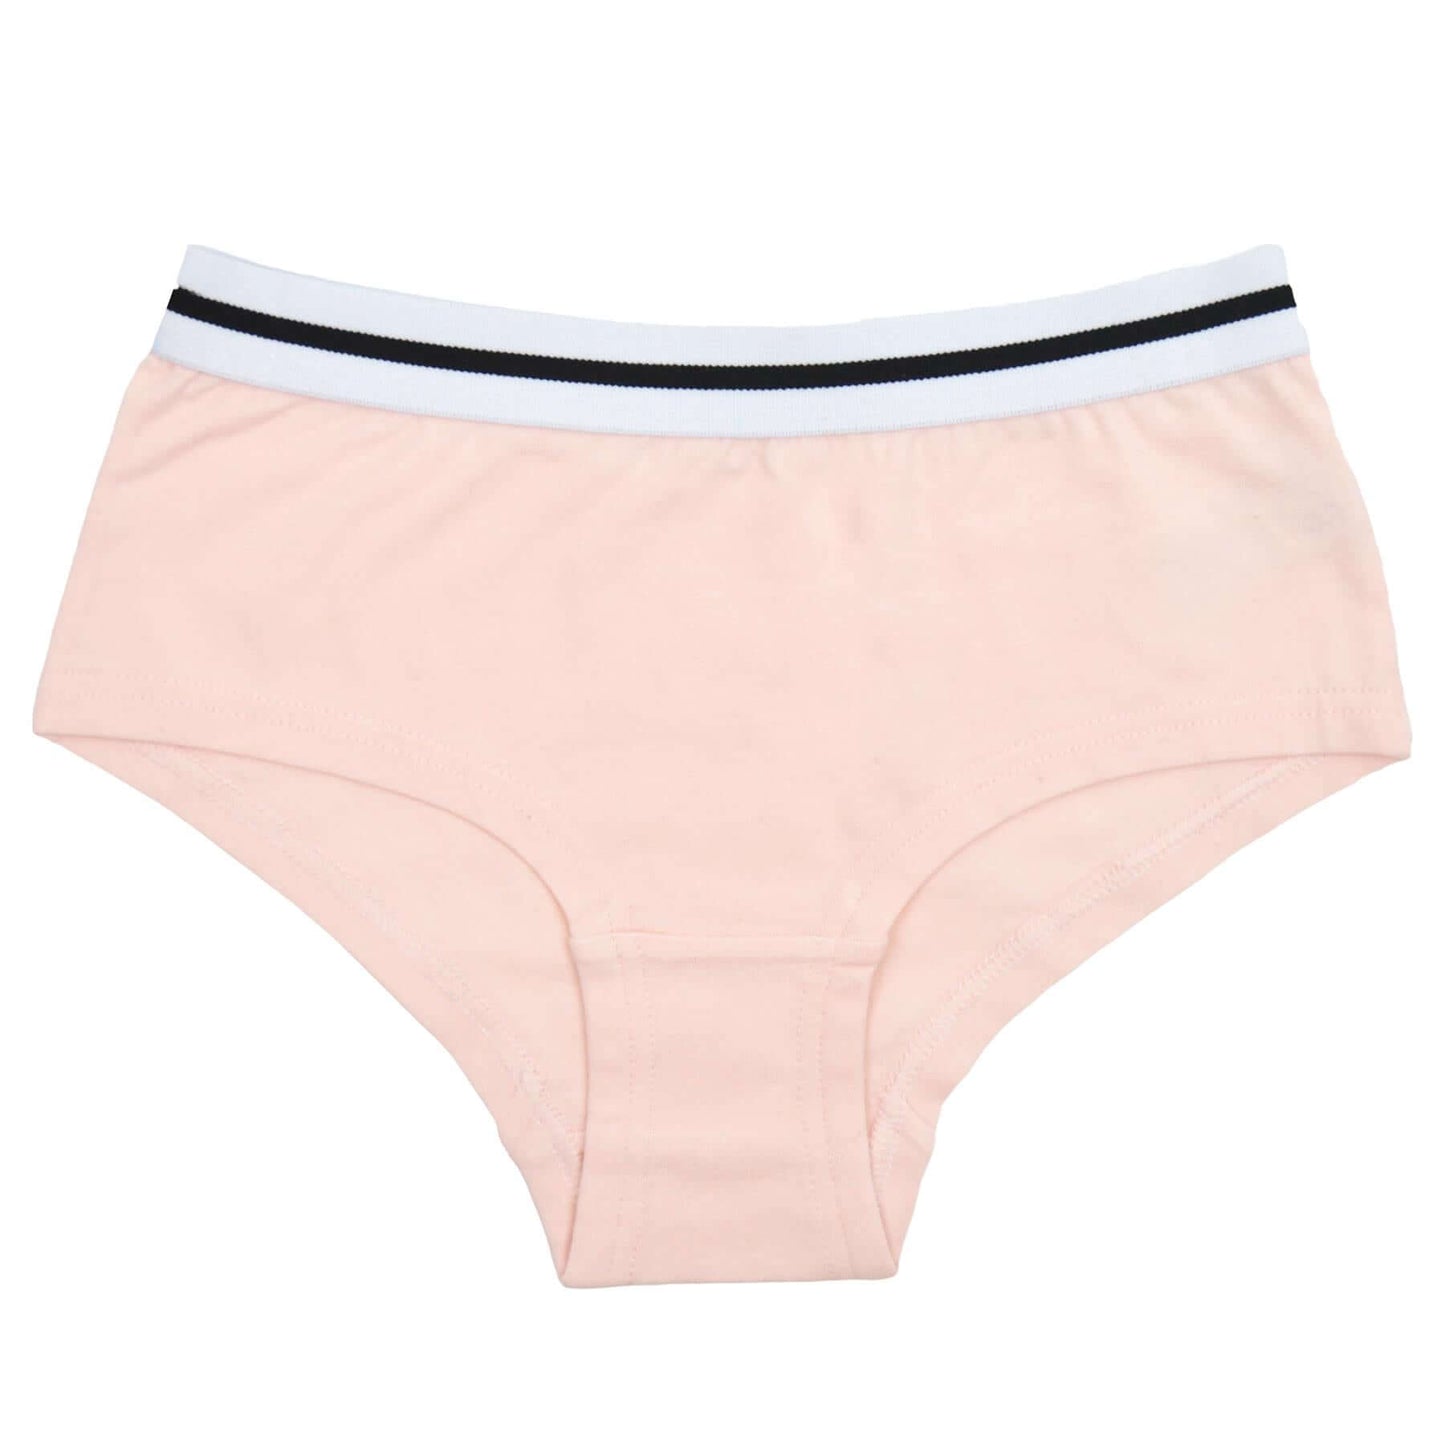 Pack of 4 Girls Shorts Underwear Soft Cotton Comfort Fit Knickers Short. Buy now for £10.00. A Underwear by Daisy Dreamer. activewear, assorted, athletics, Bikini, black, bottom, boxer shorts, breathable, childrens, clothing, comfortable, cosy, cotton, da